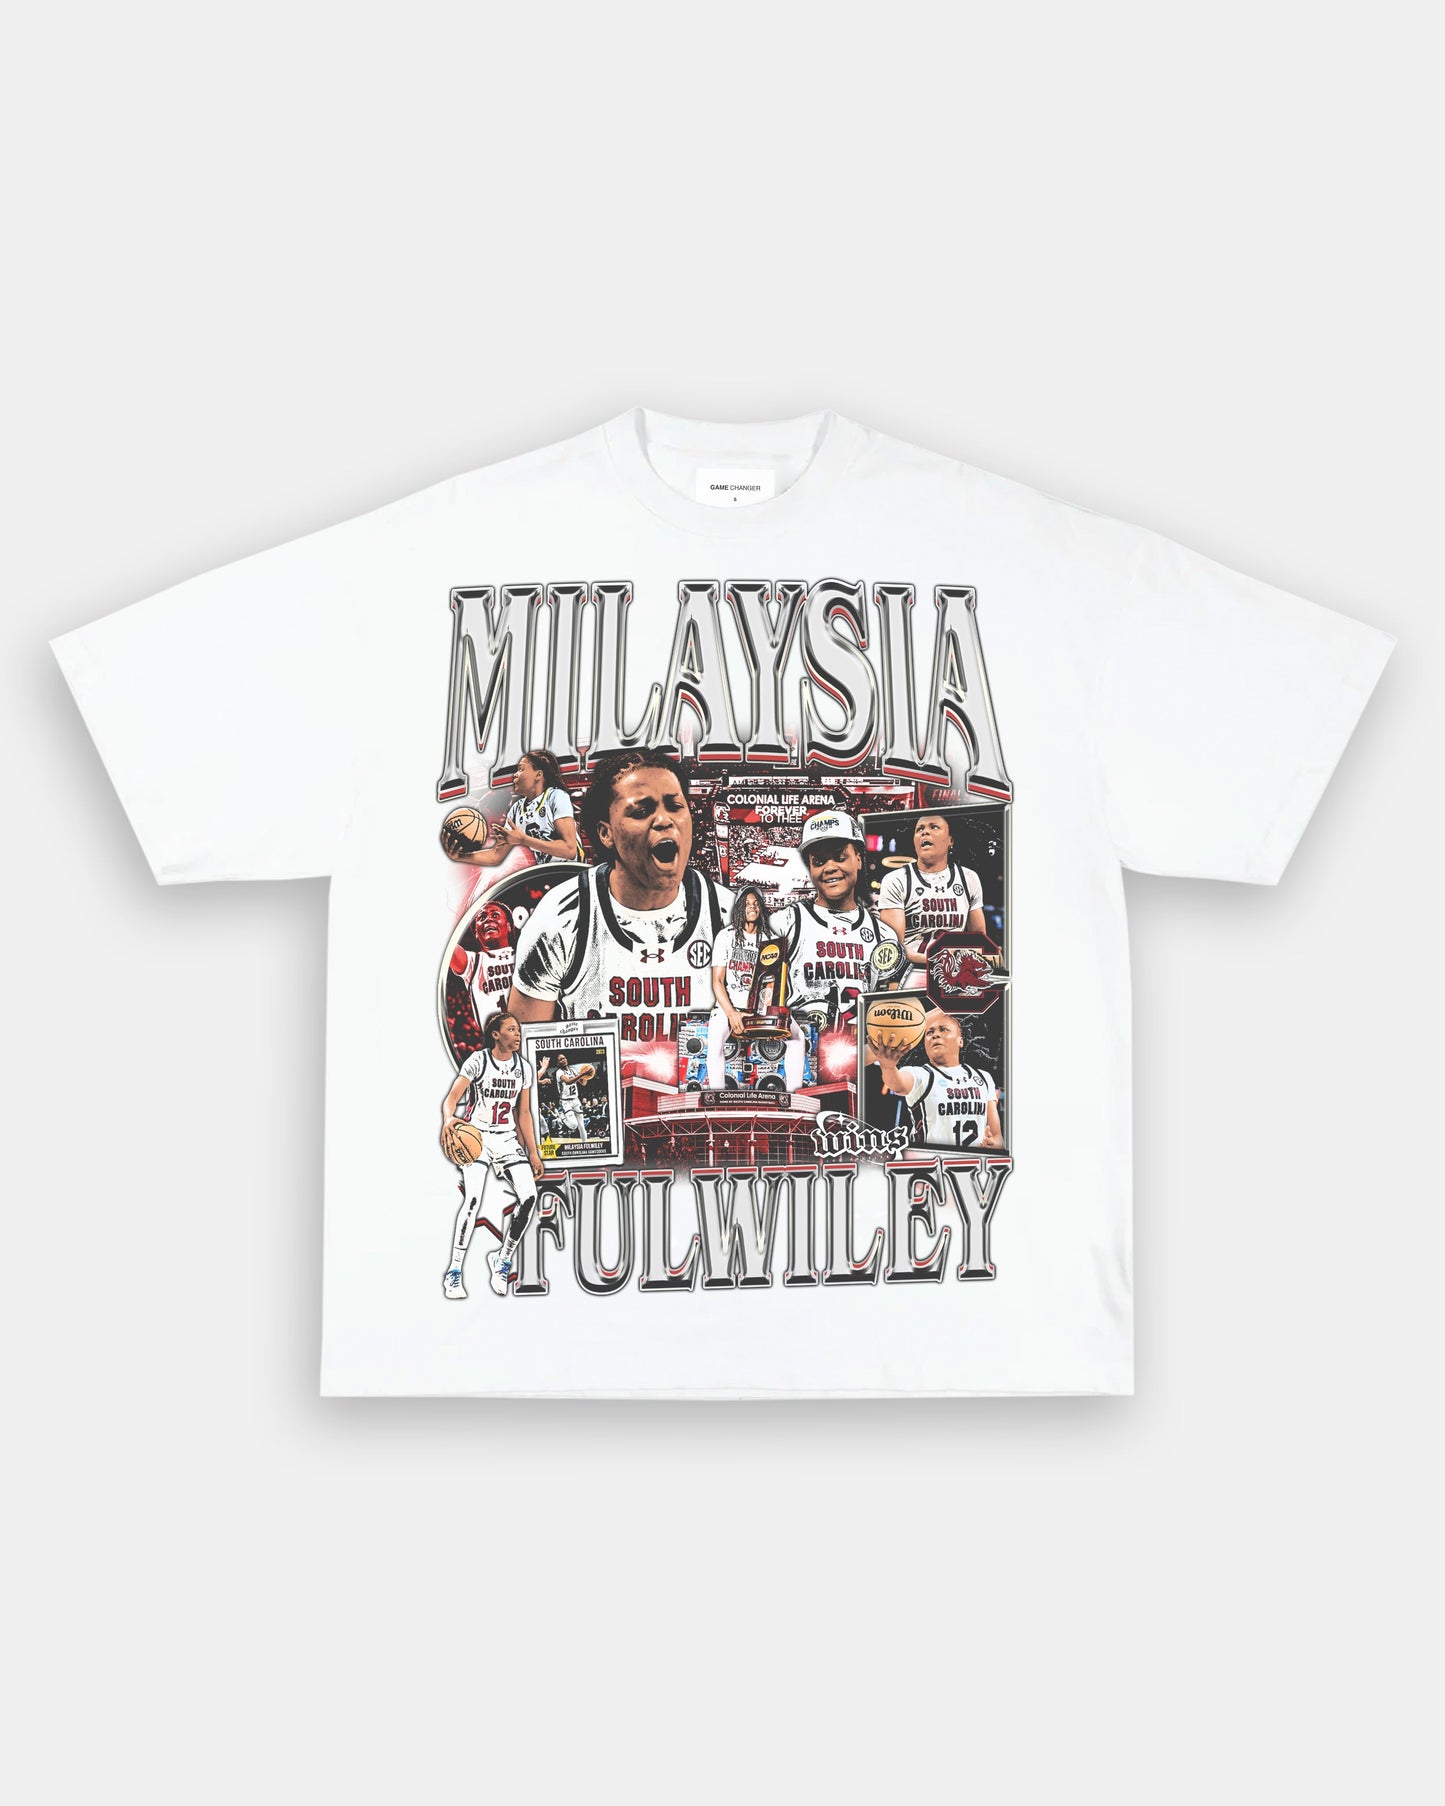 MILAYSIA FULWILEY TEE